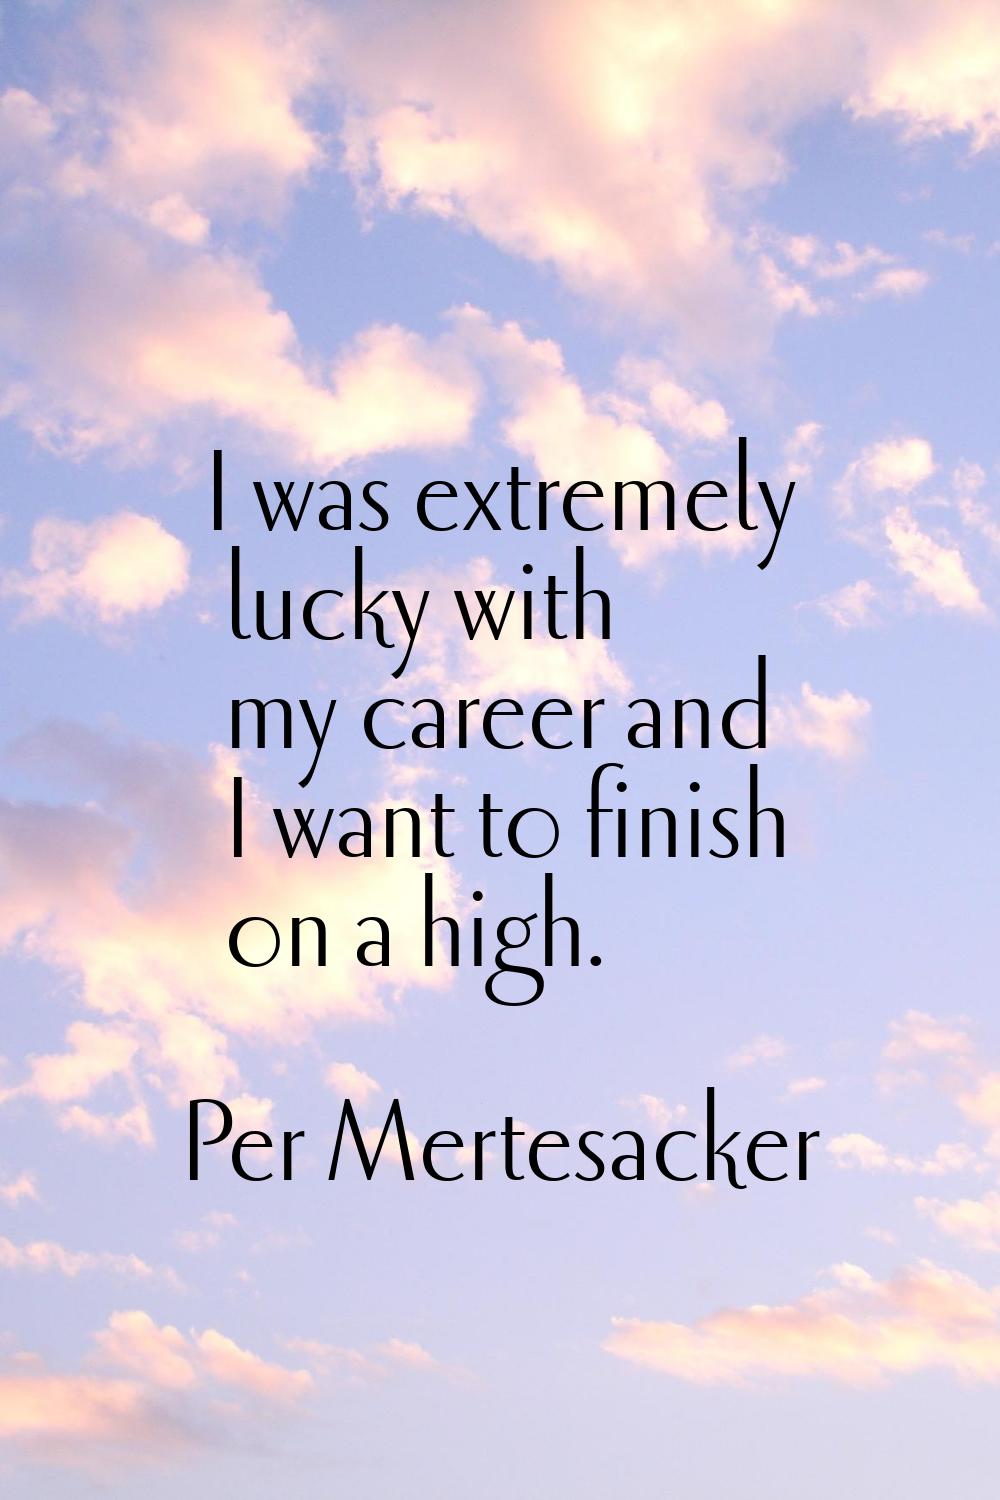 I was extremely lucky with my career and I want to finish on a high.